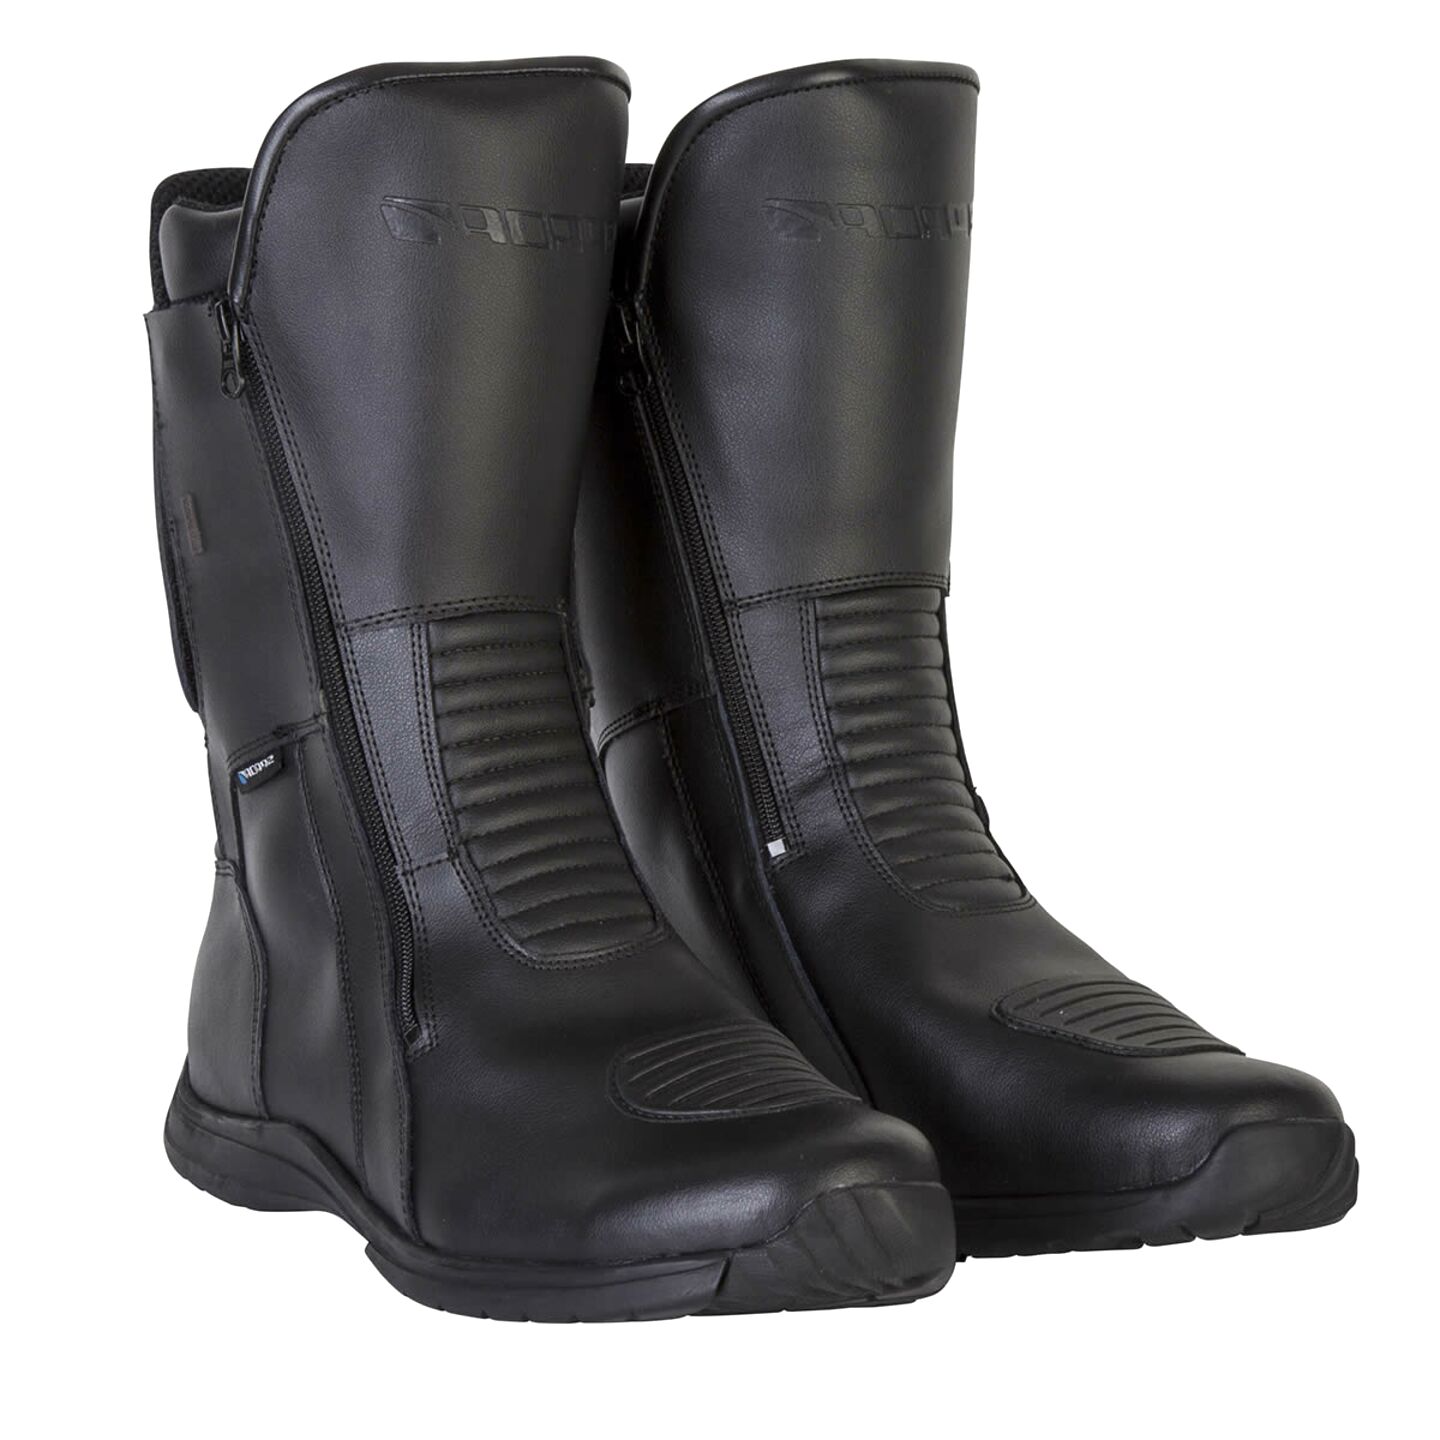 Spada Motorcycle Boots for sale in UK | 54 used Spada Motorcycle Boots